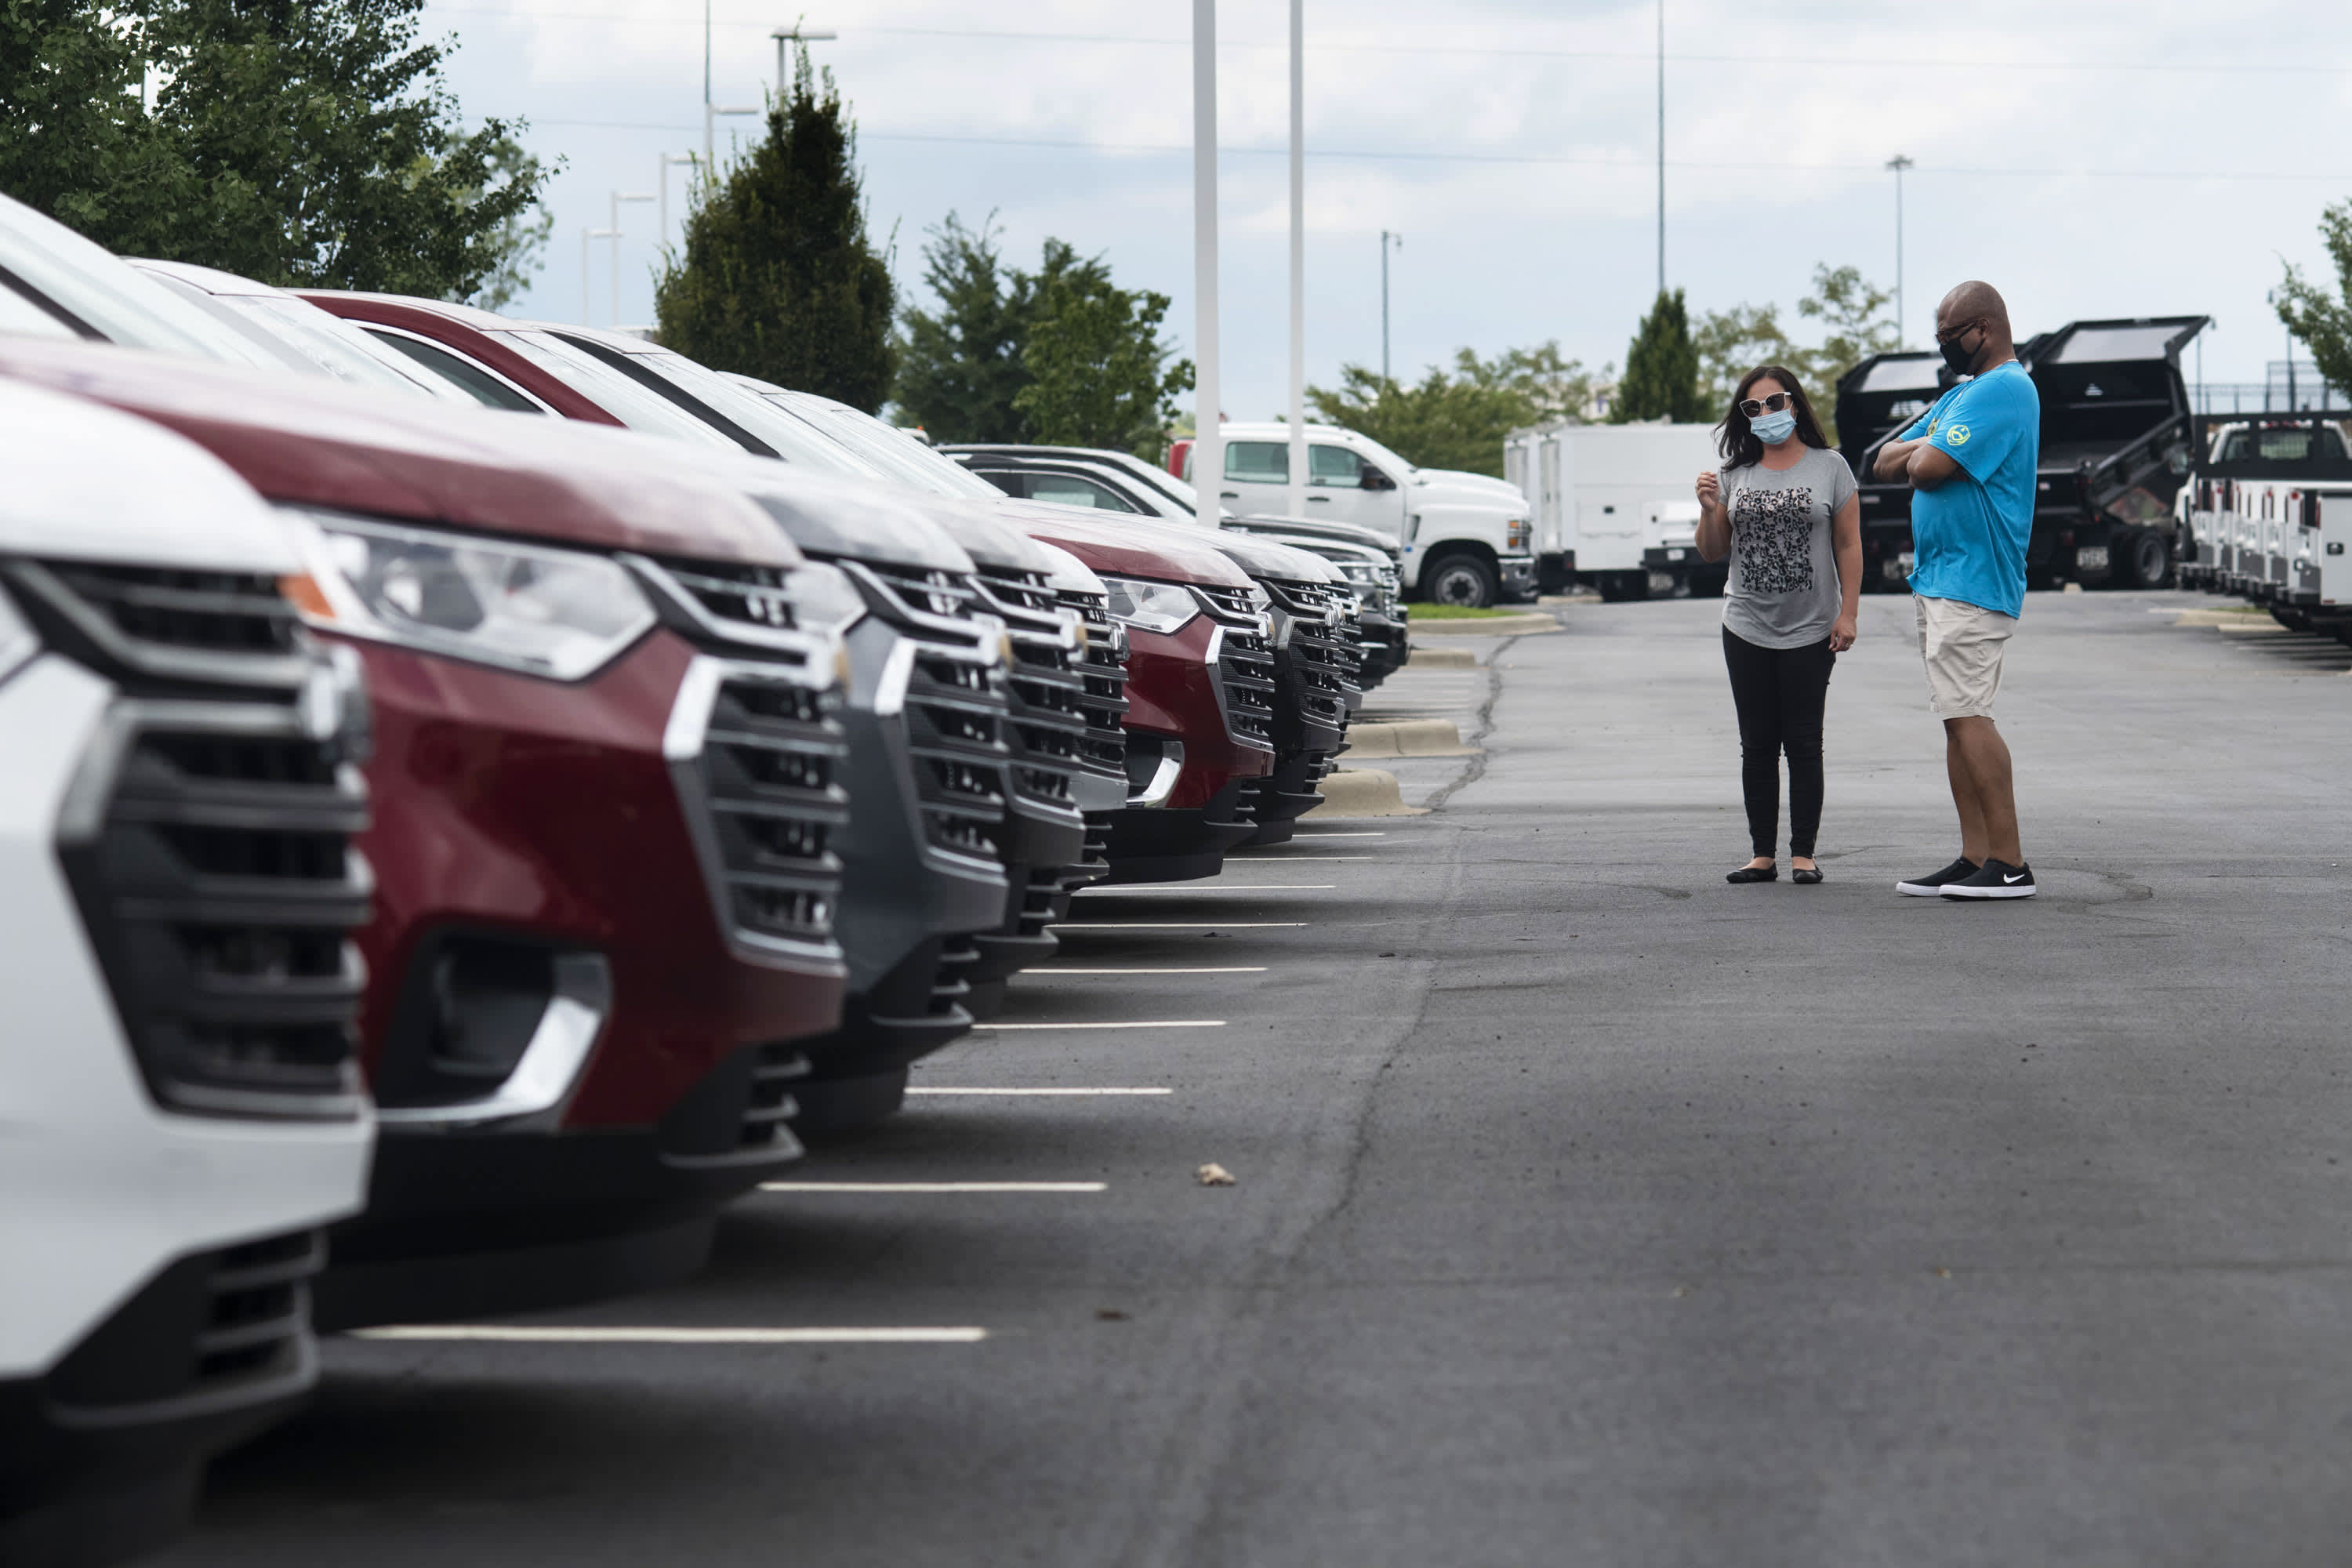 New or used, car prices climb as inventory dips this spring